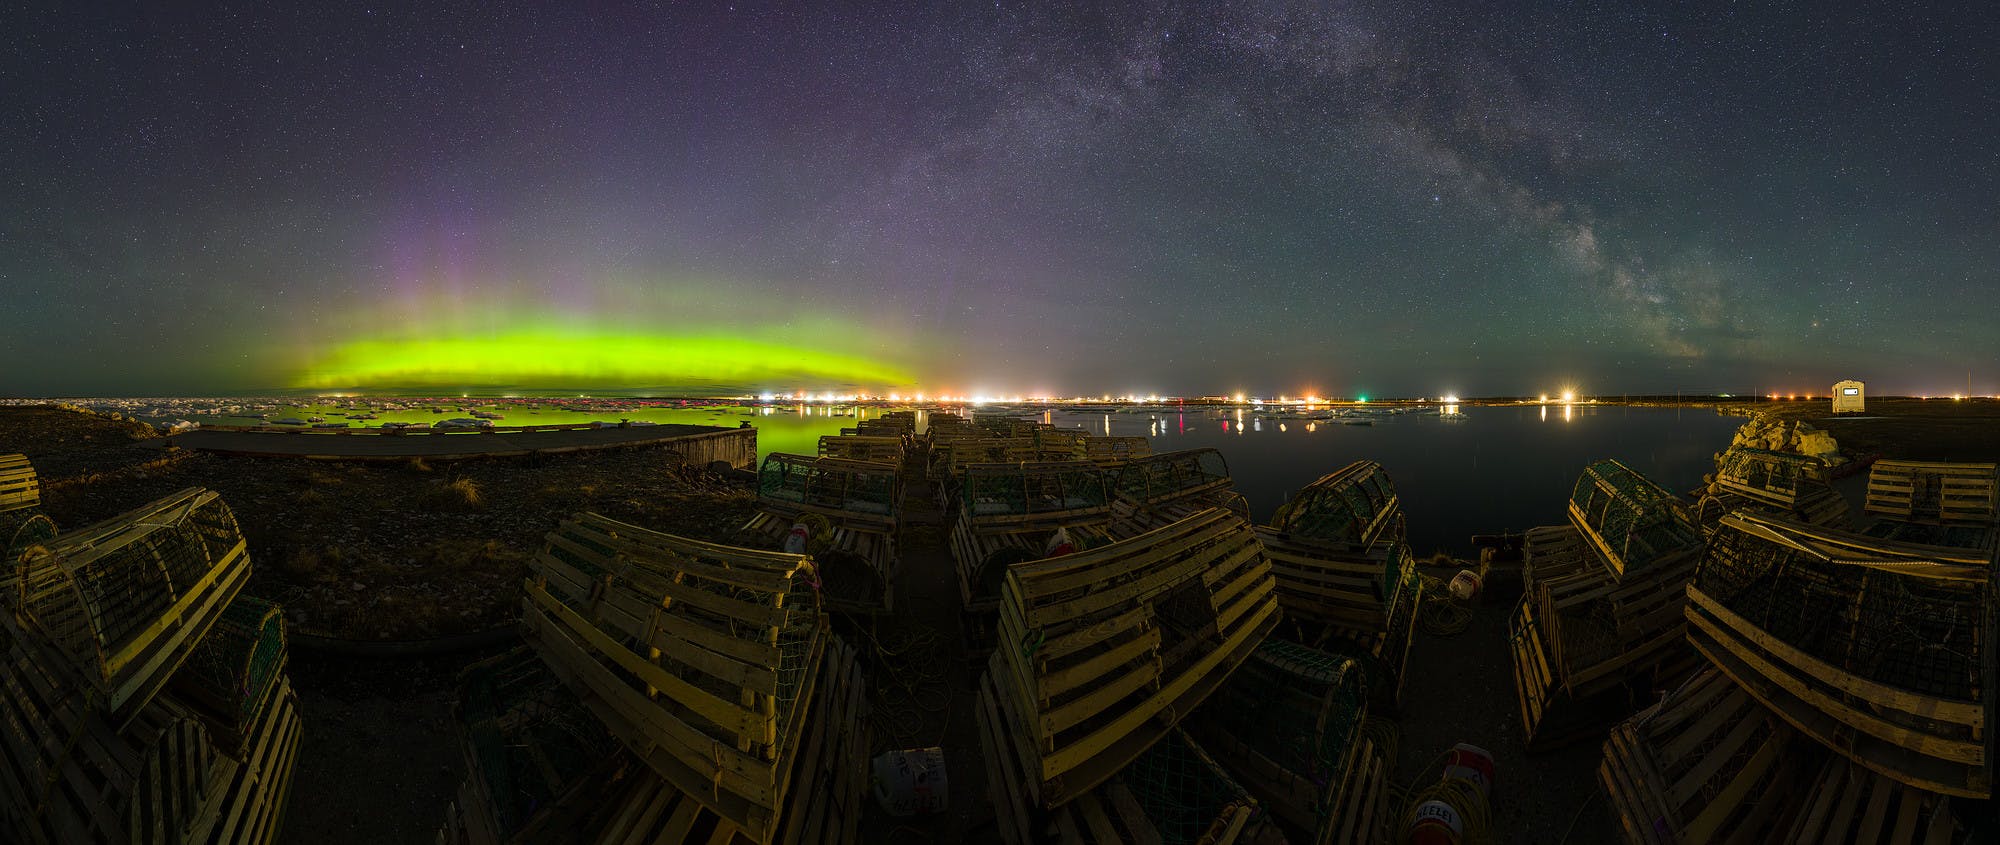 Aurora and Milky Way Over Wooden Lobster Traps